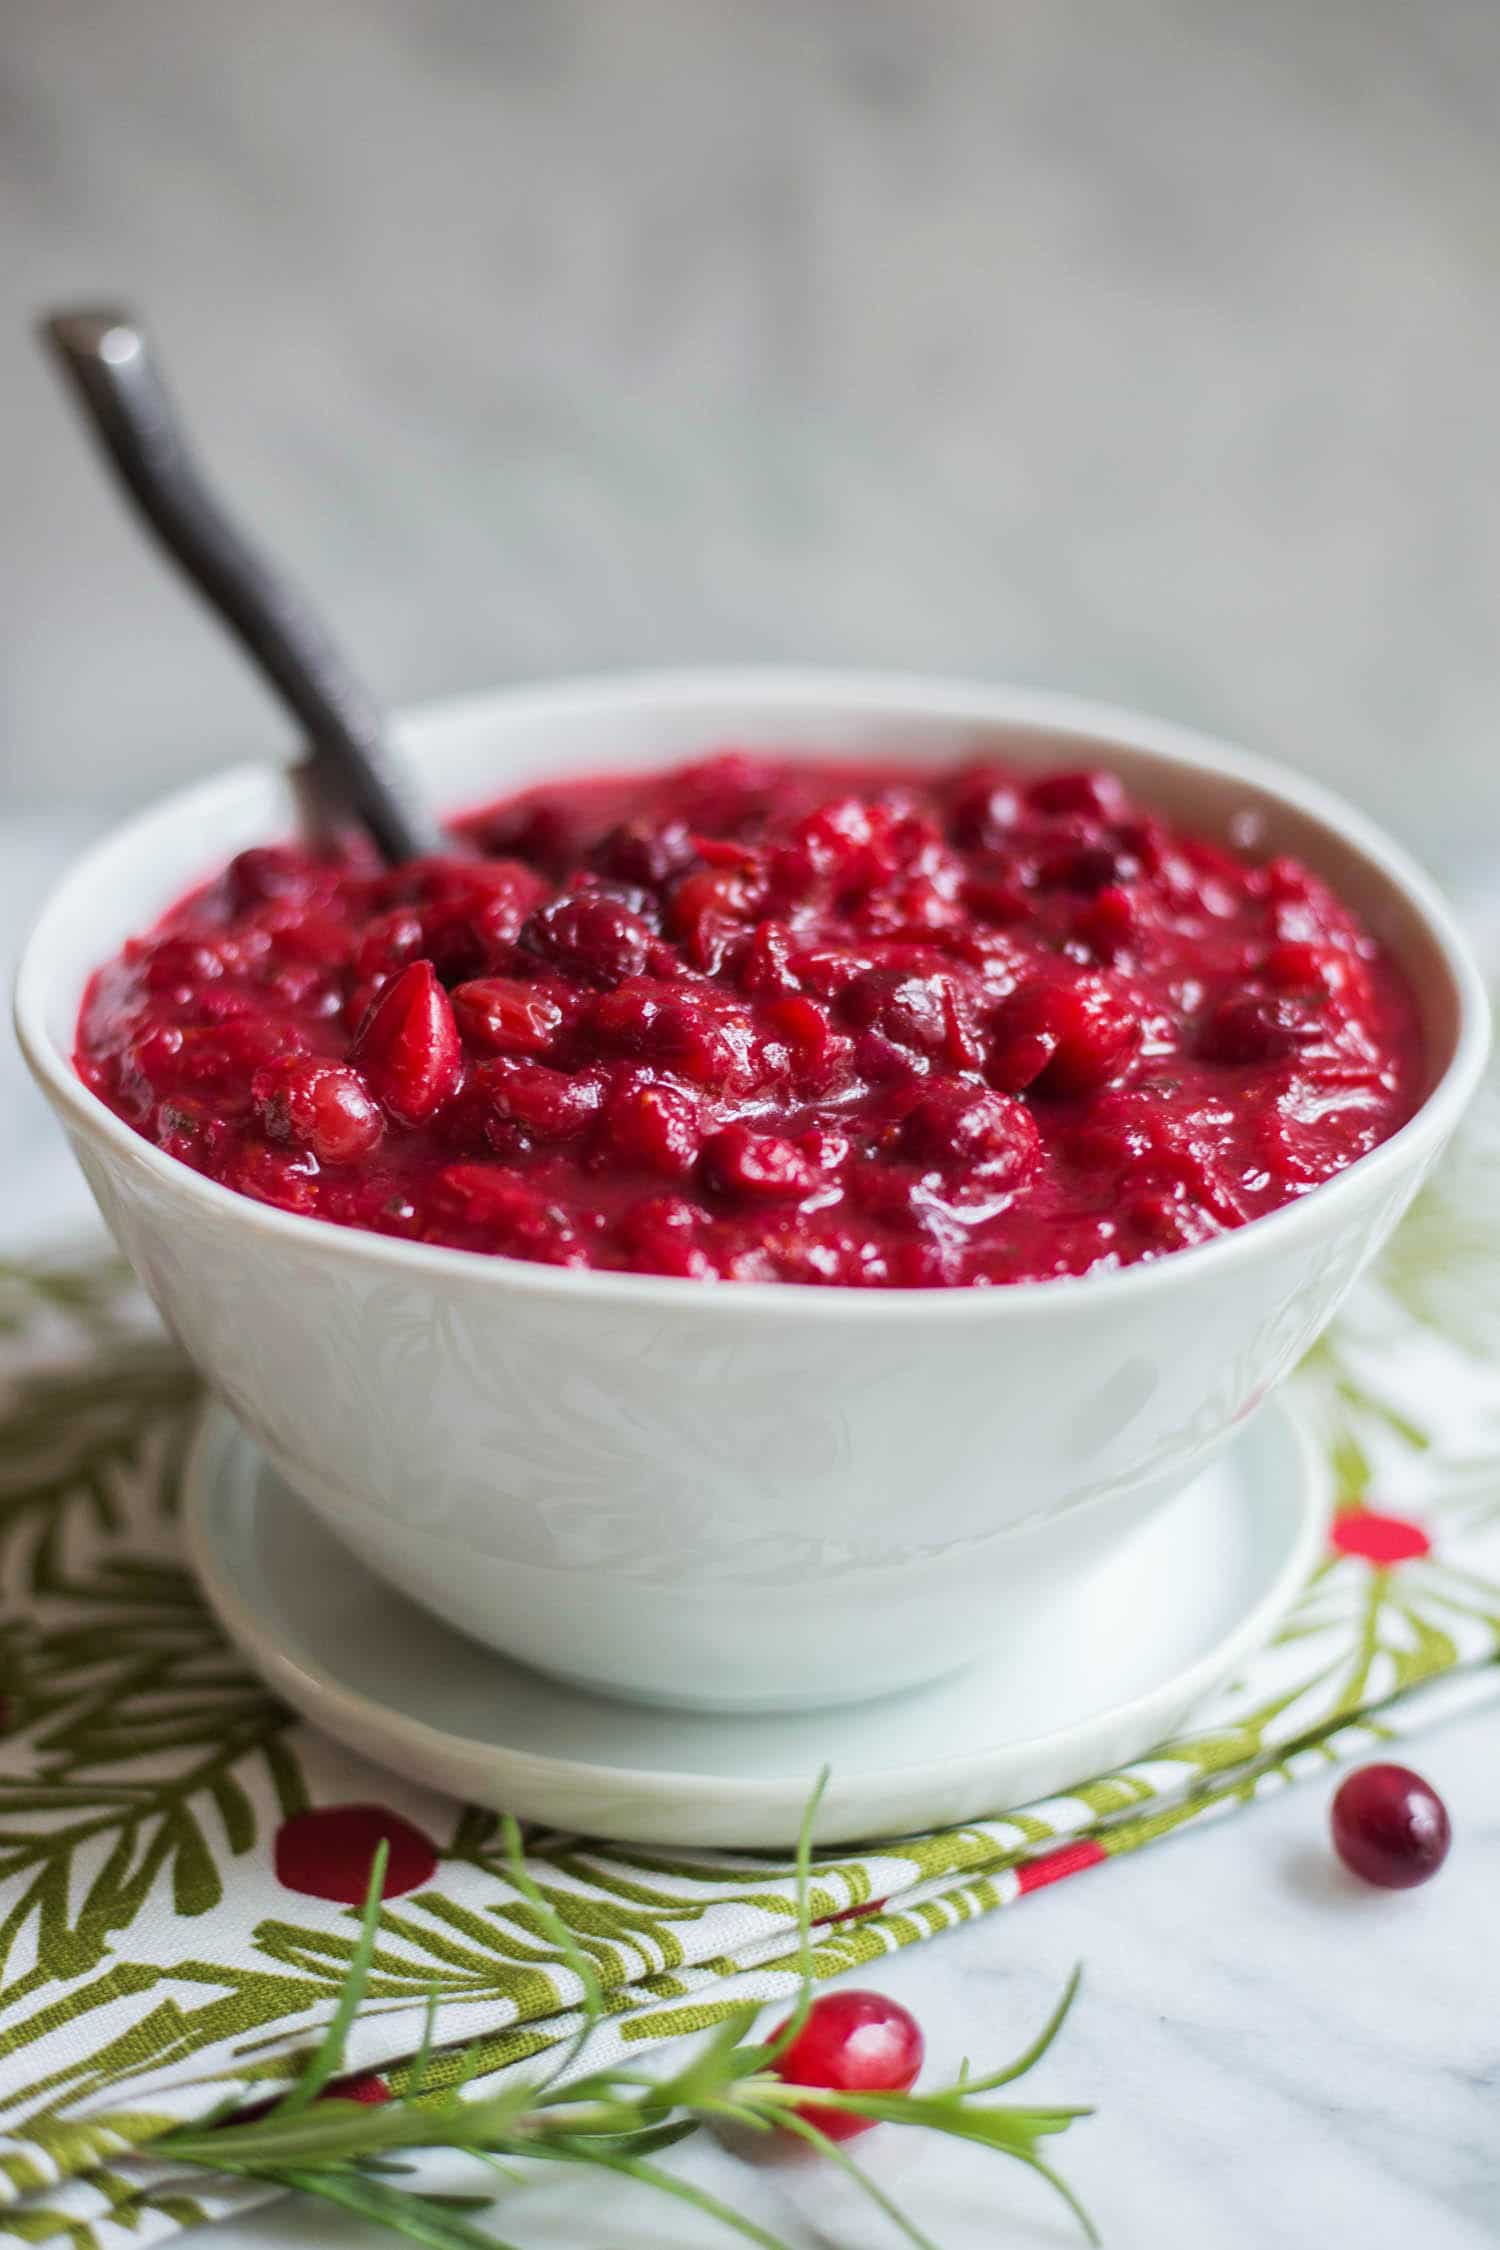 Homemade Savory Cranberry Sauce - Artzy Foodie